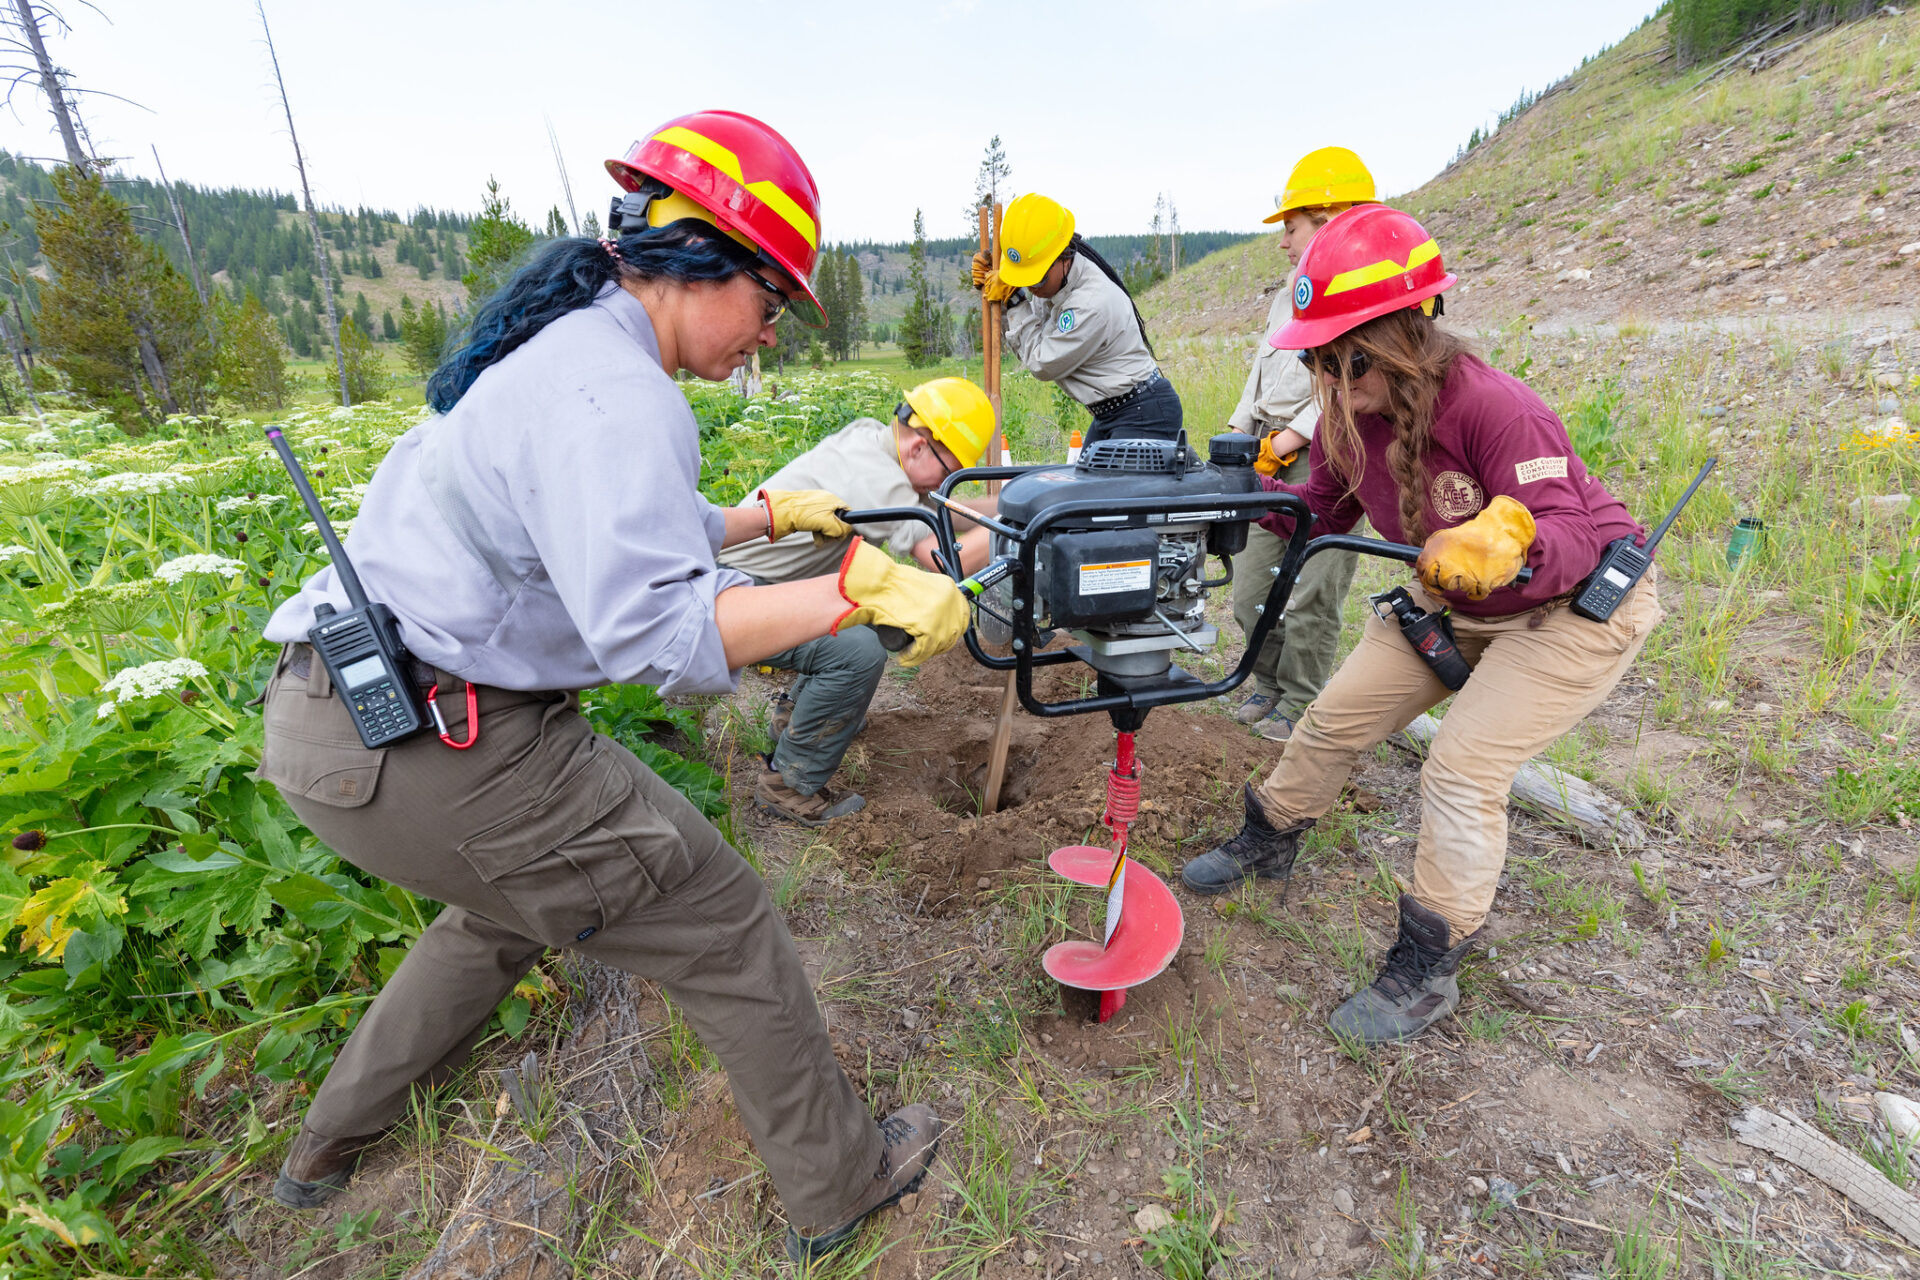 Yellowstone recruiting for 2023 Youth Conservation Corps program